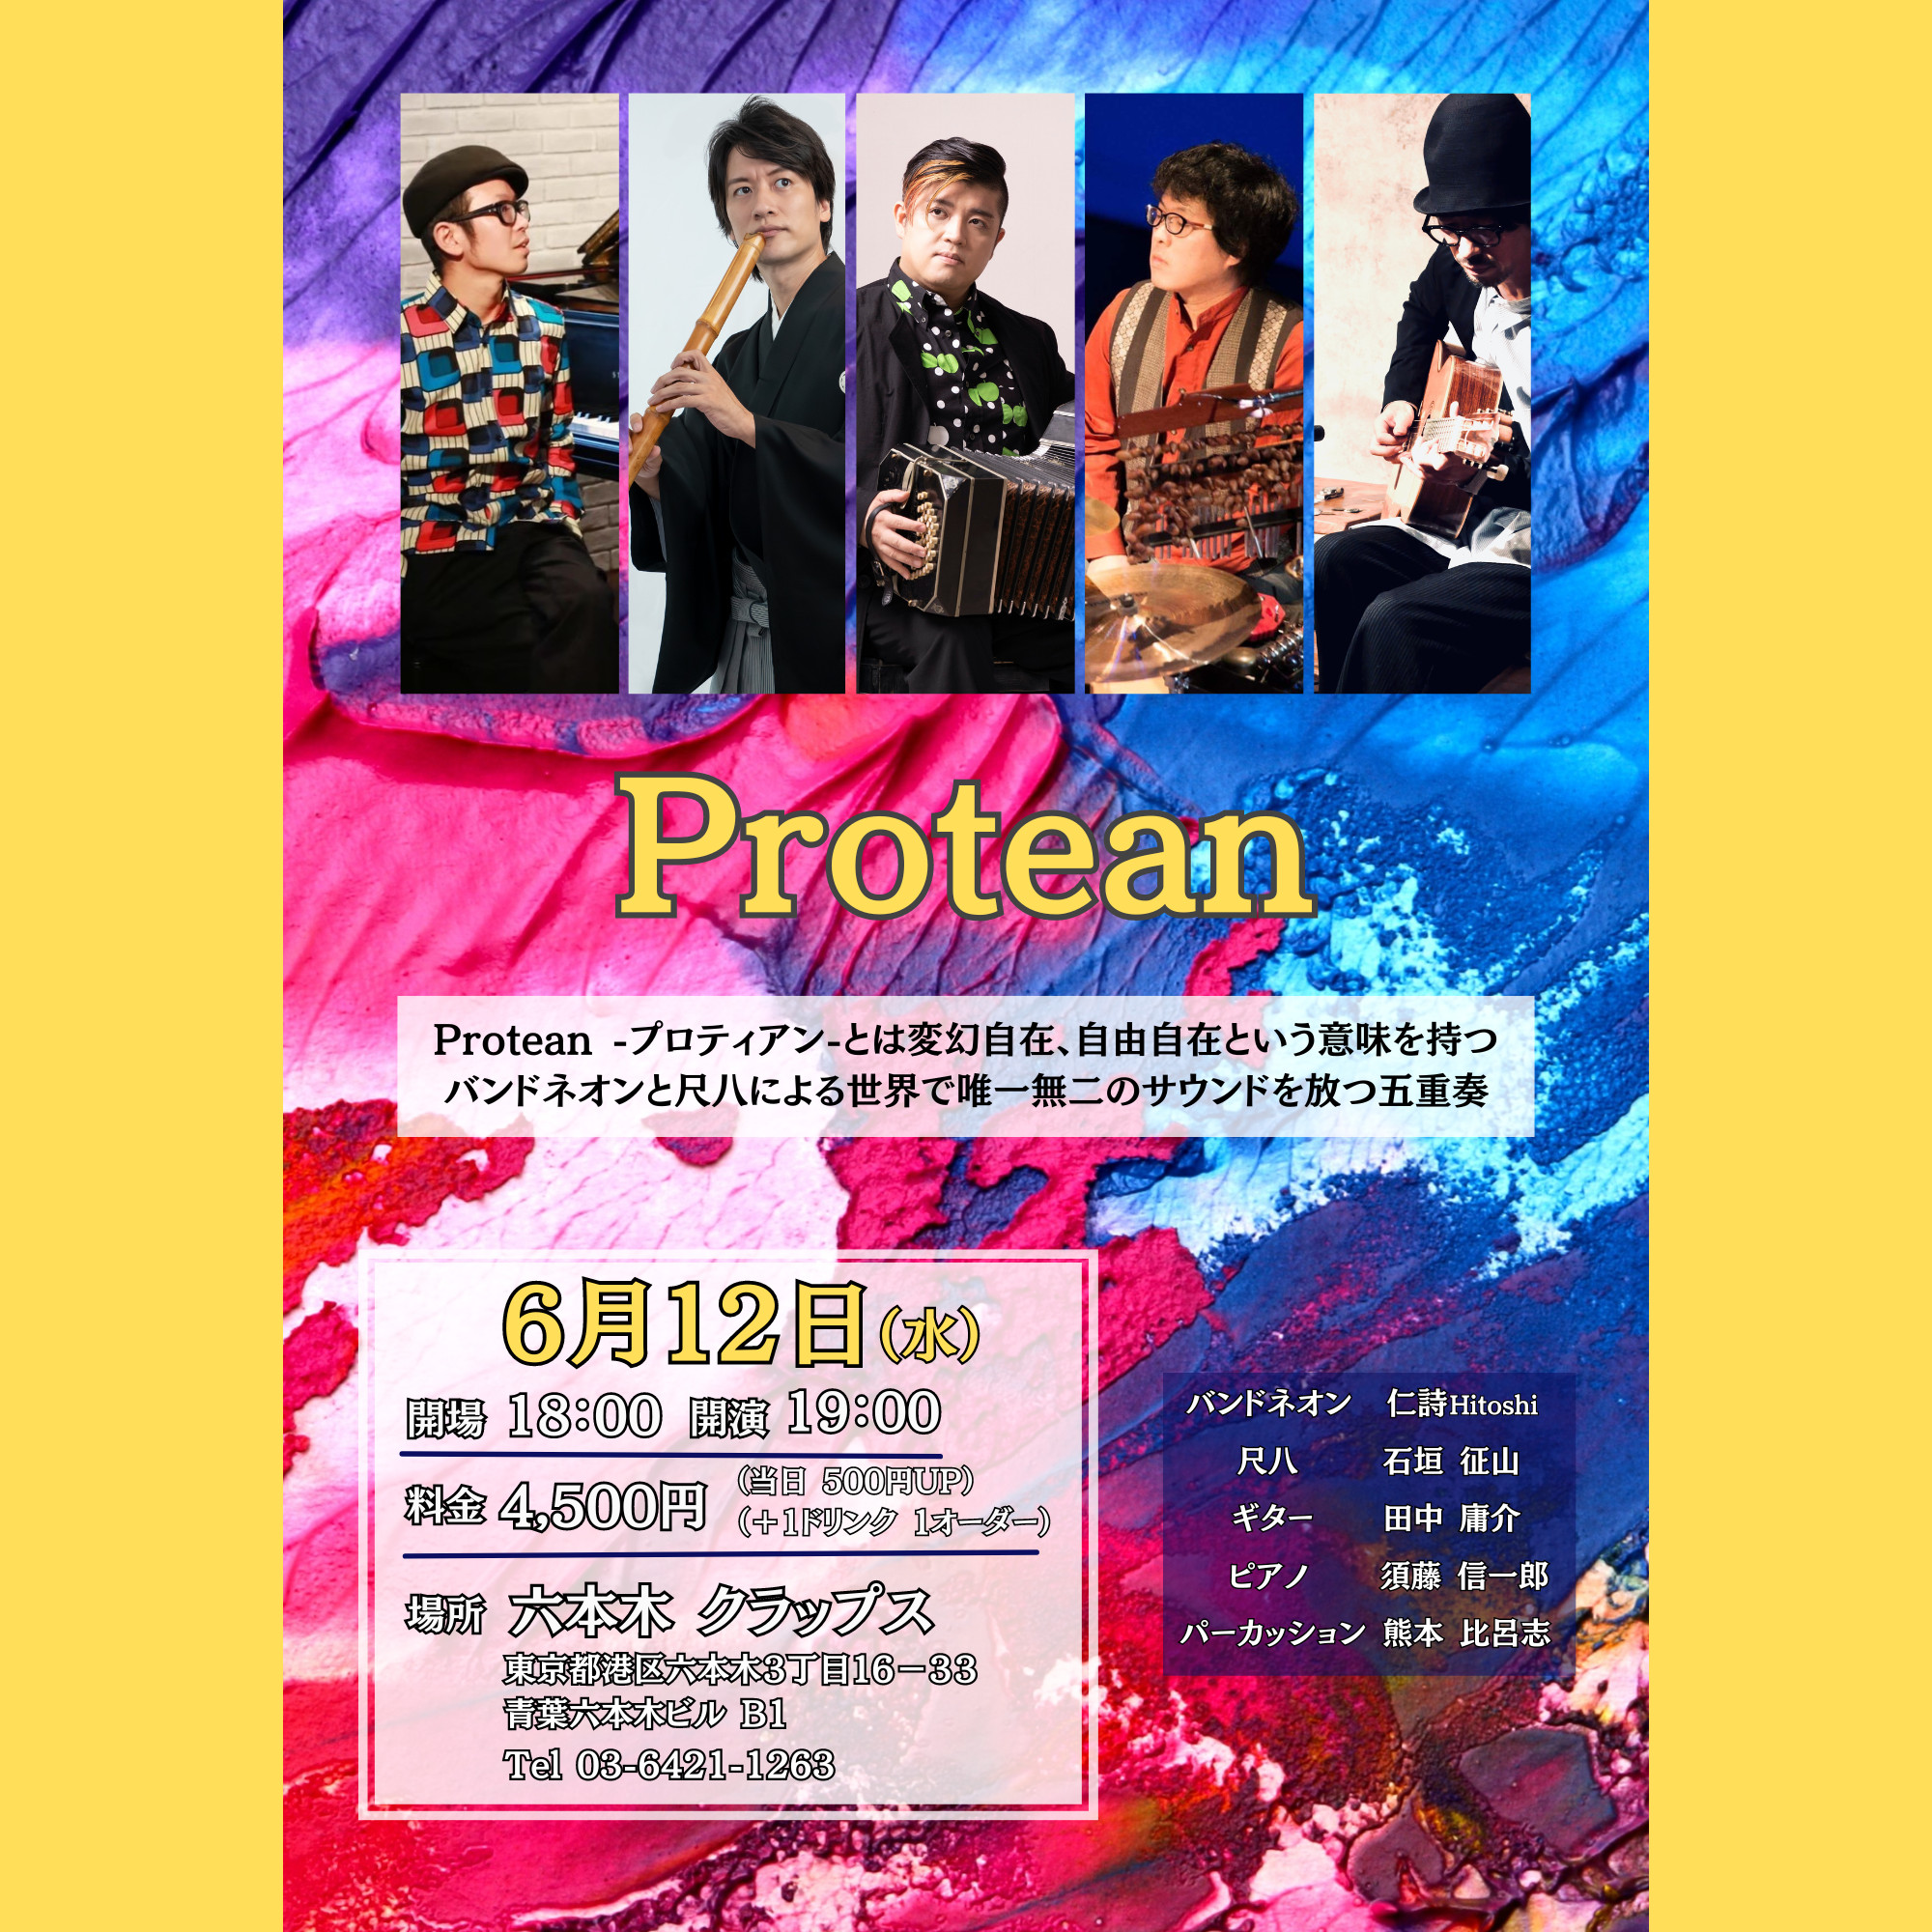 Protean《同時配信あり》